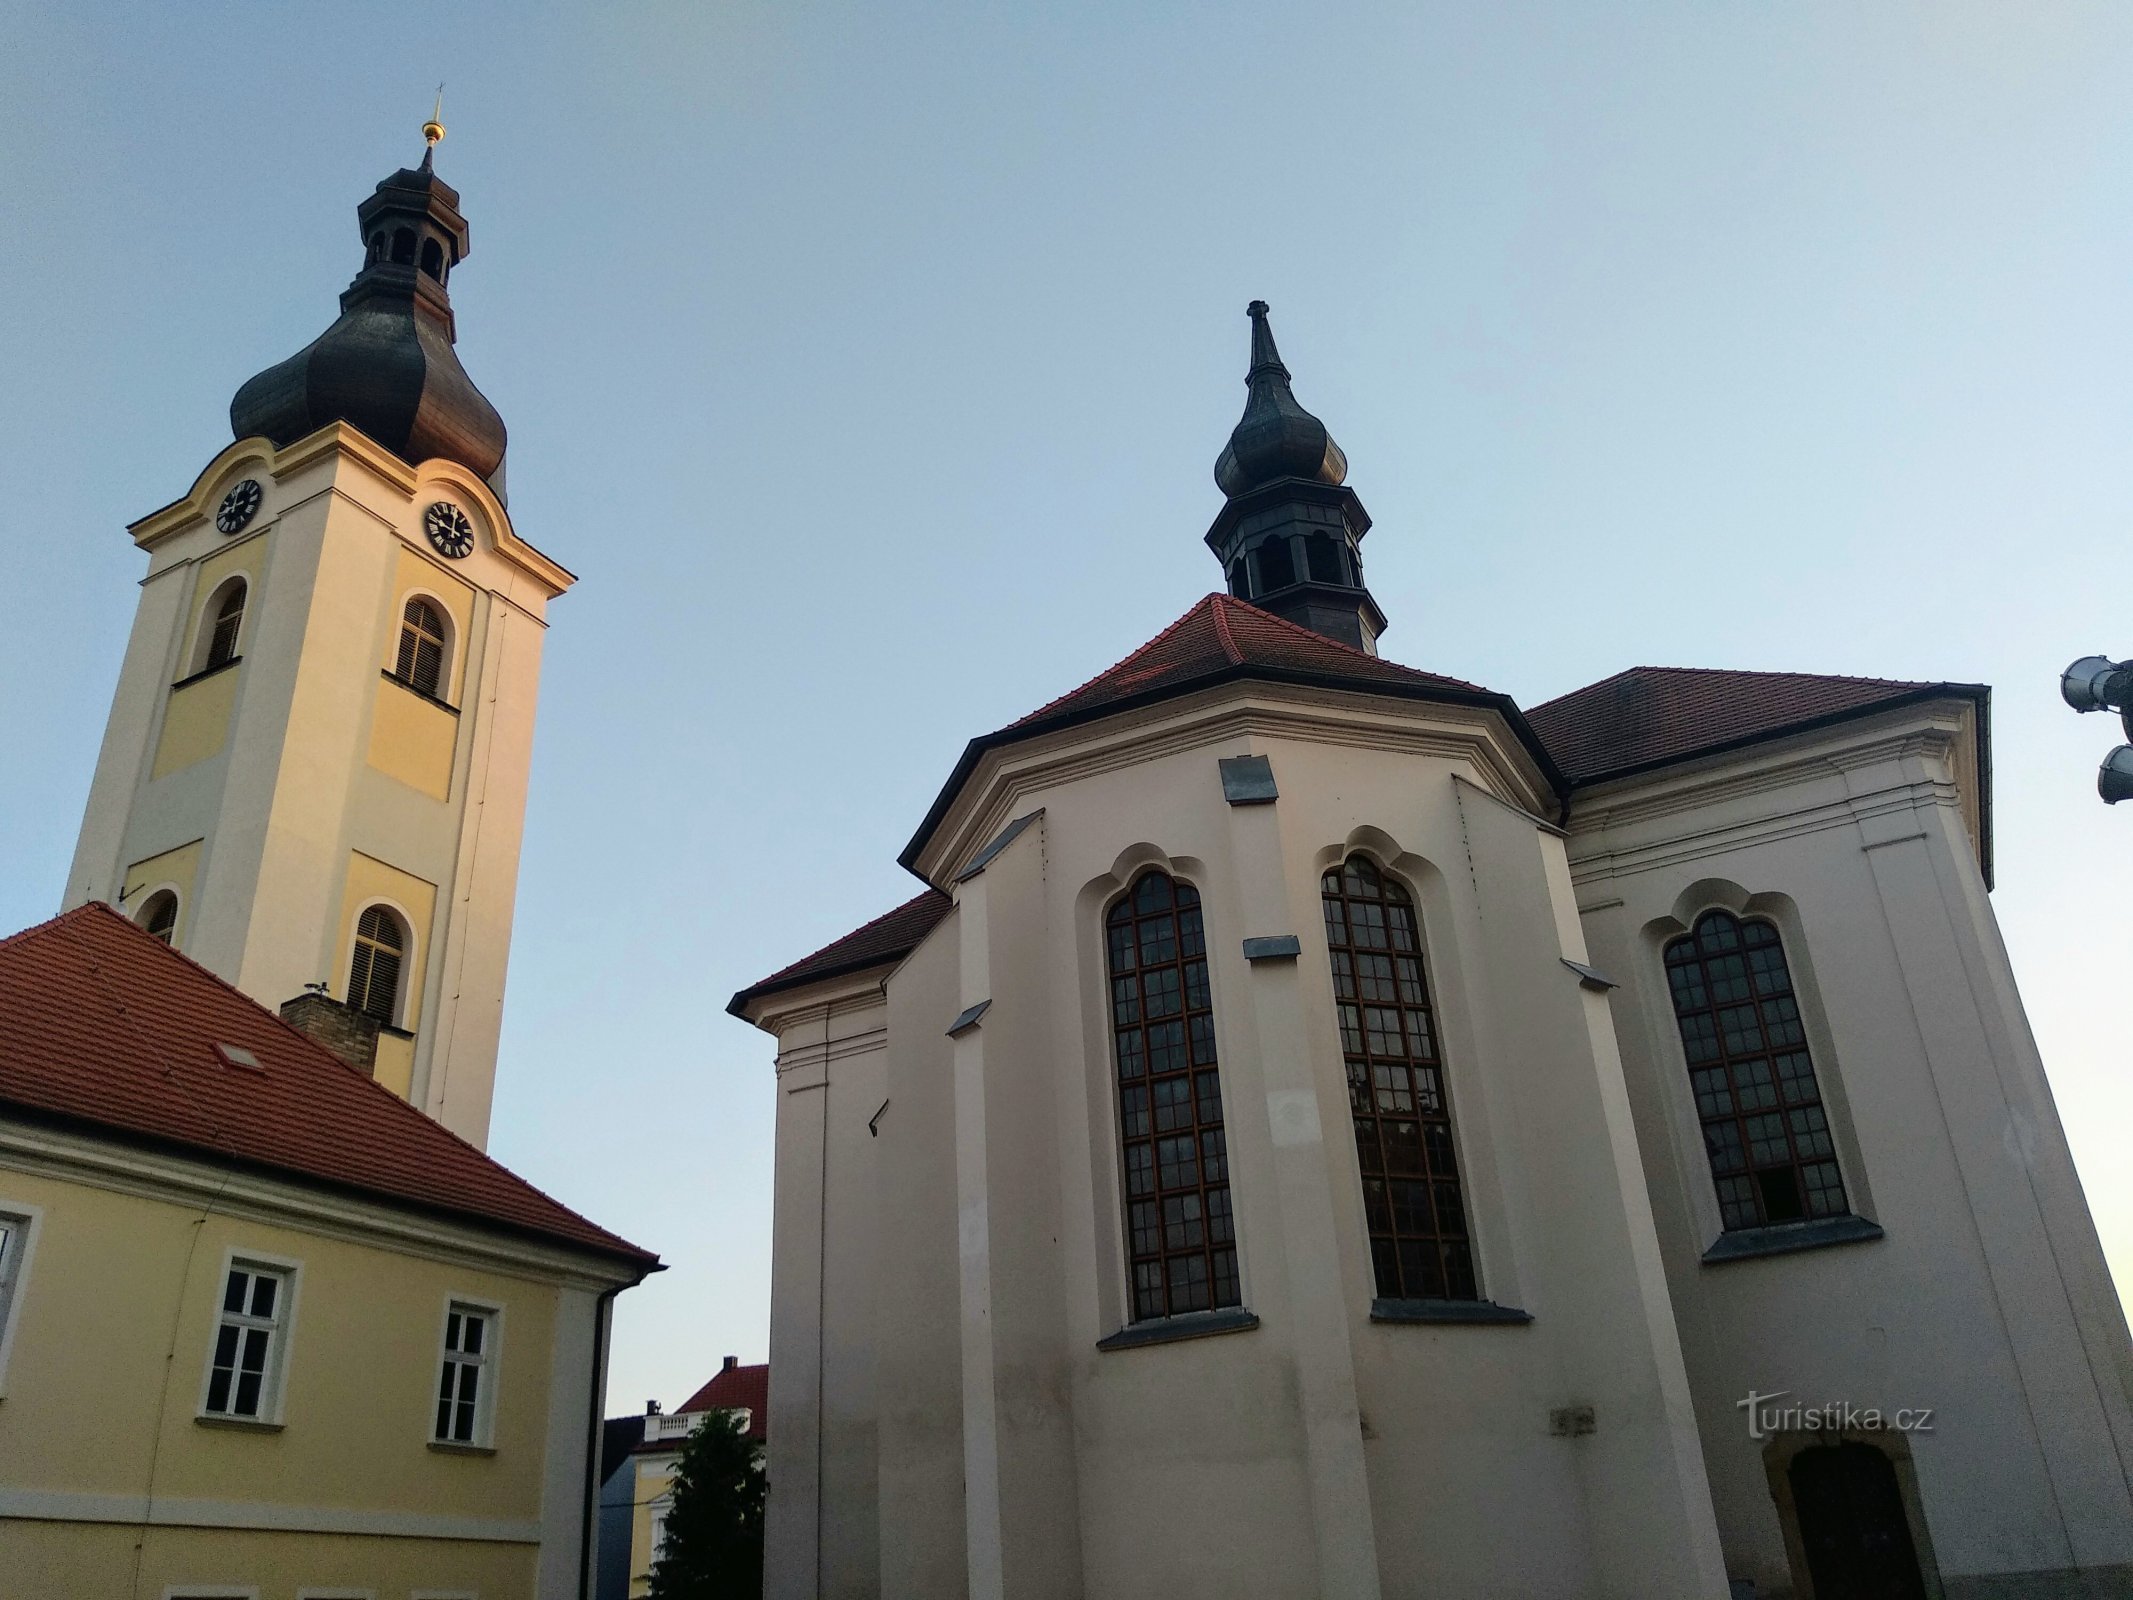 church of st. Nicholas and the bell tower in Dobřany